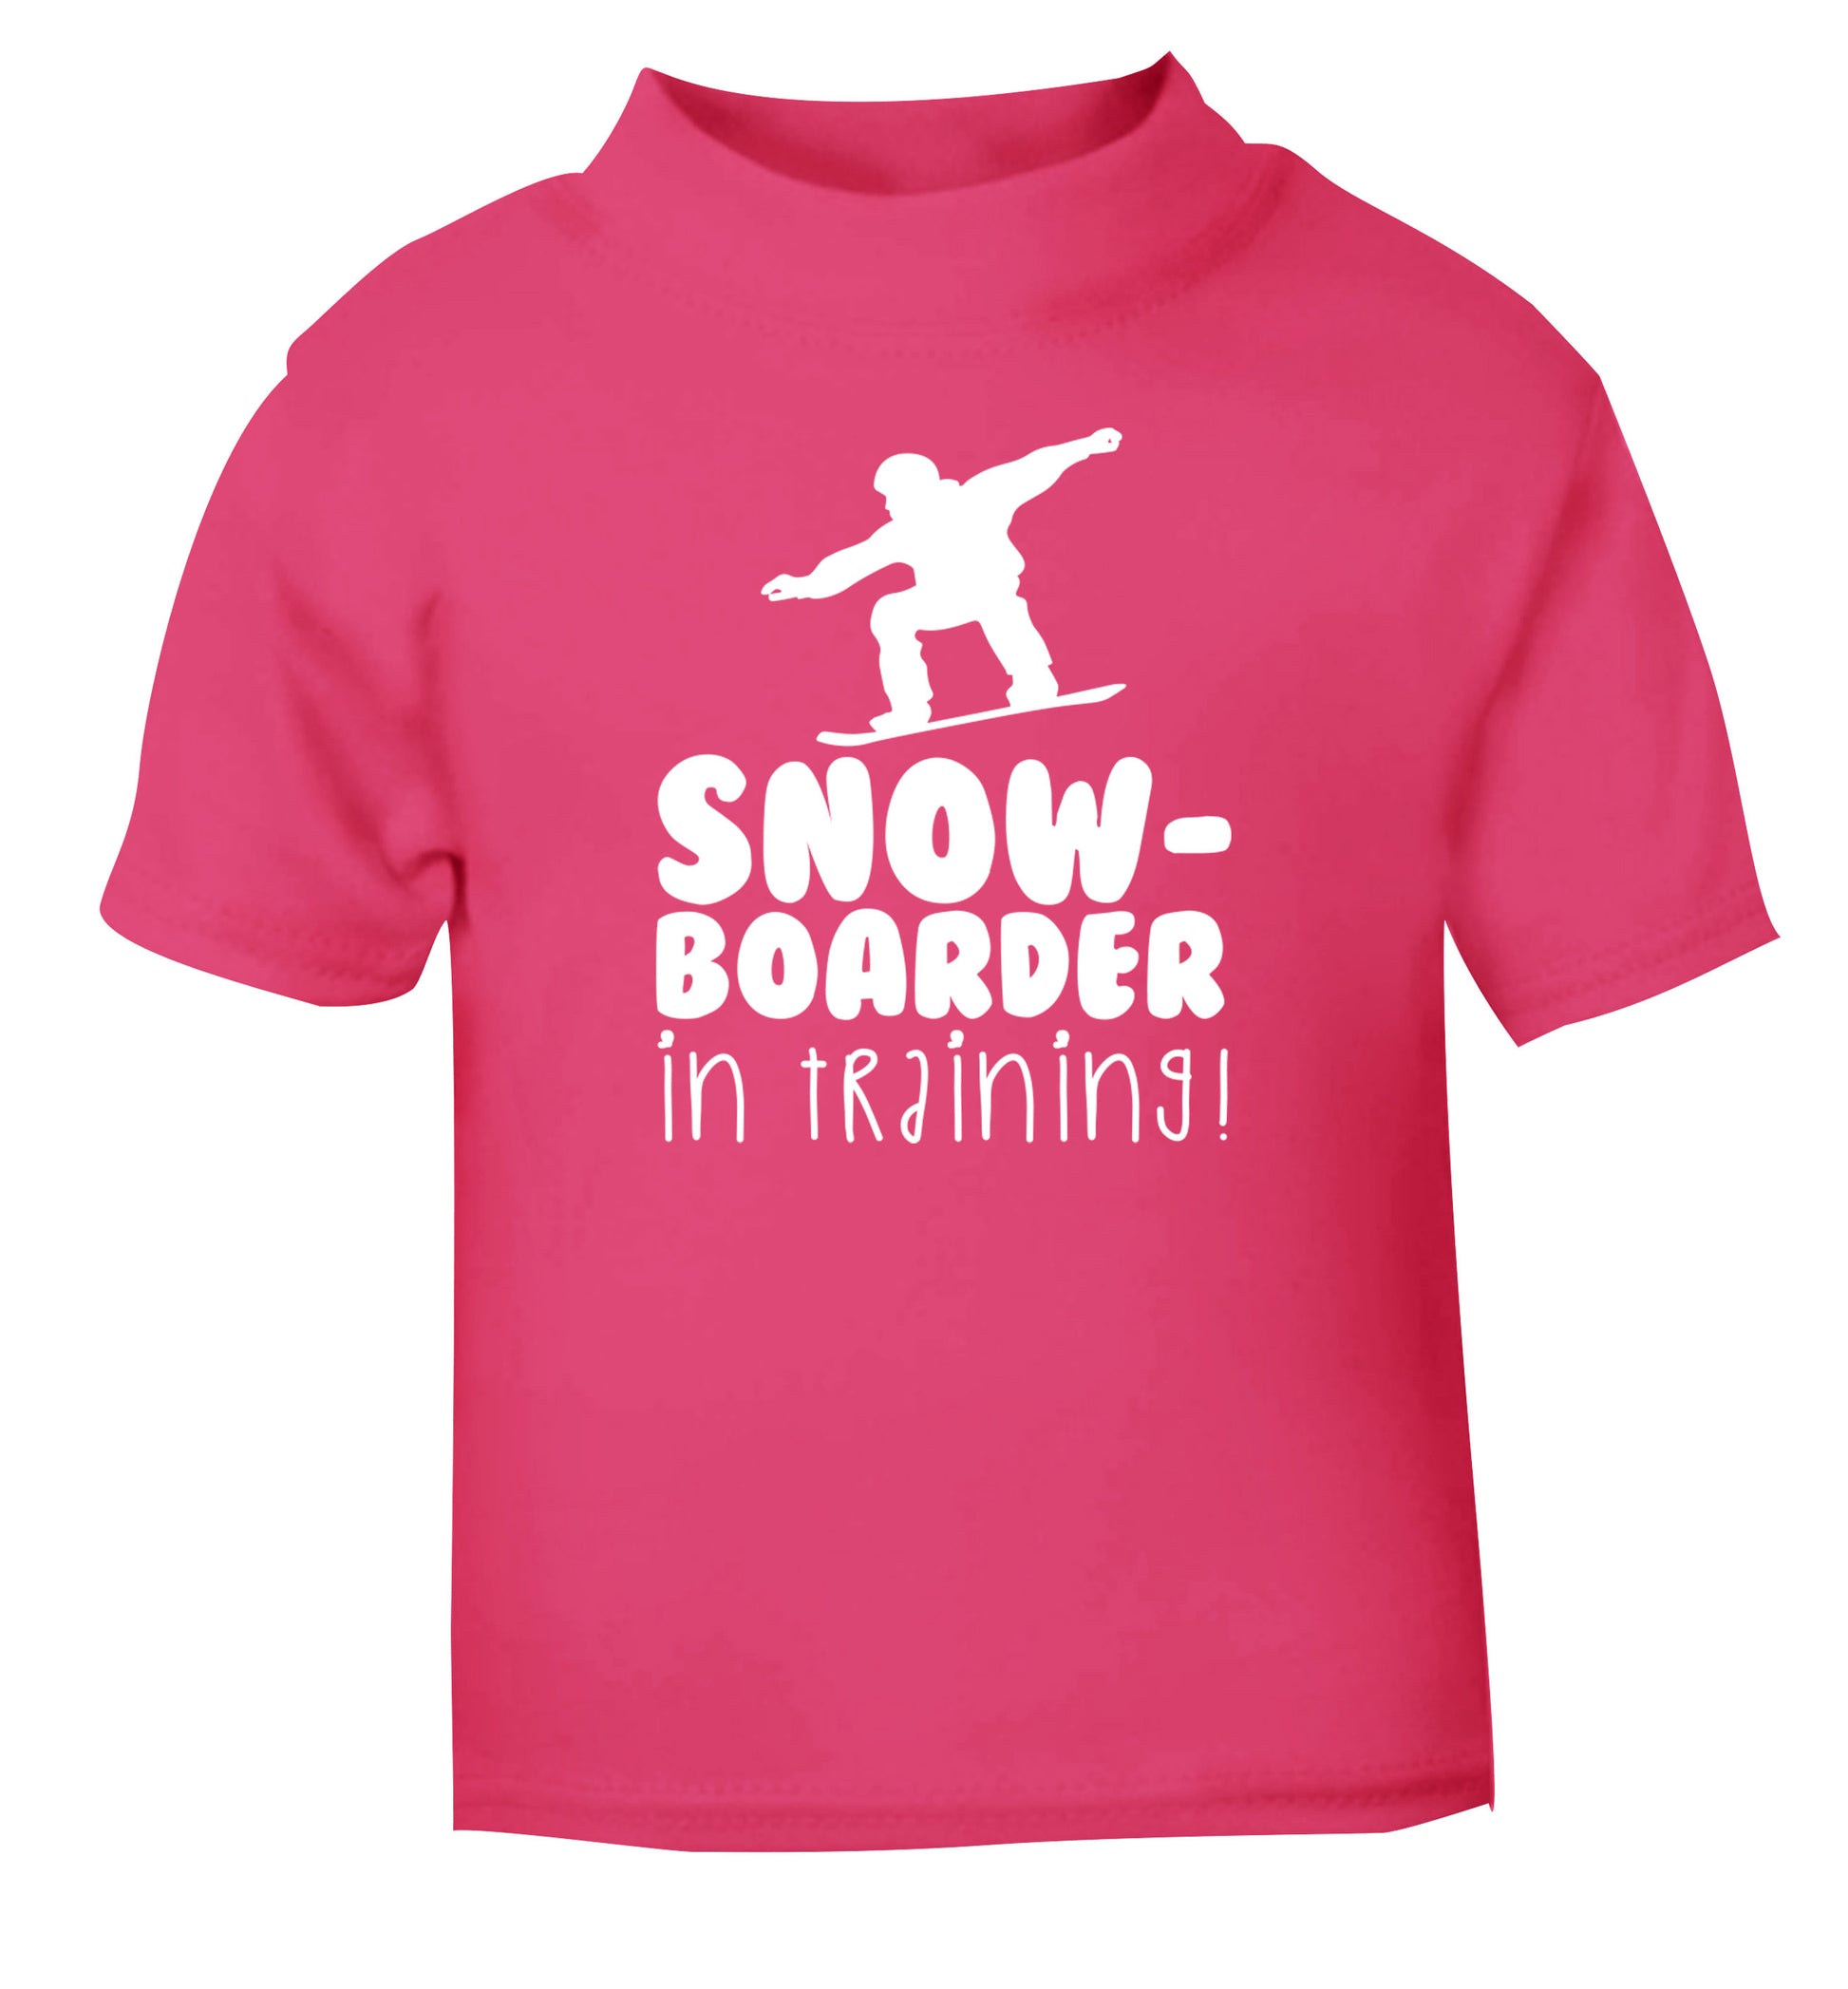 Snowboarder in training pink Baby Toddler Tshirt 2 Years